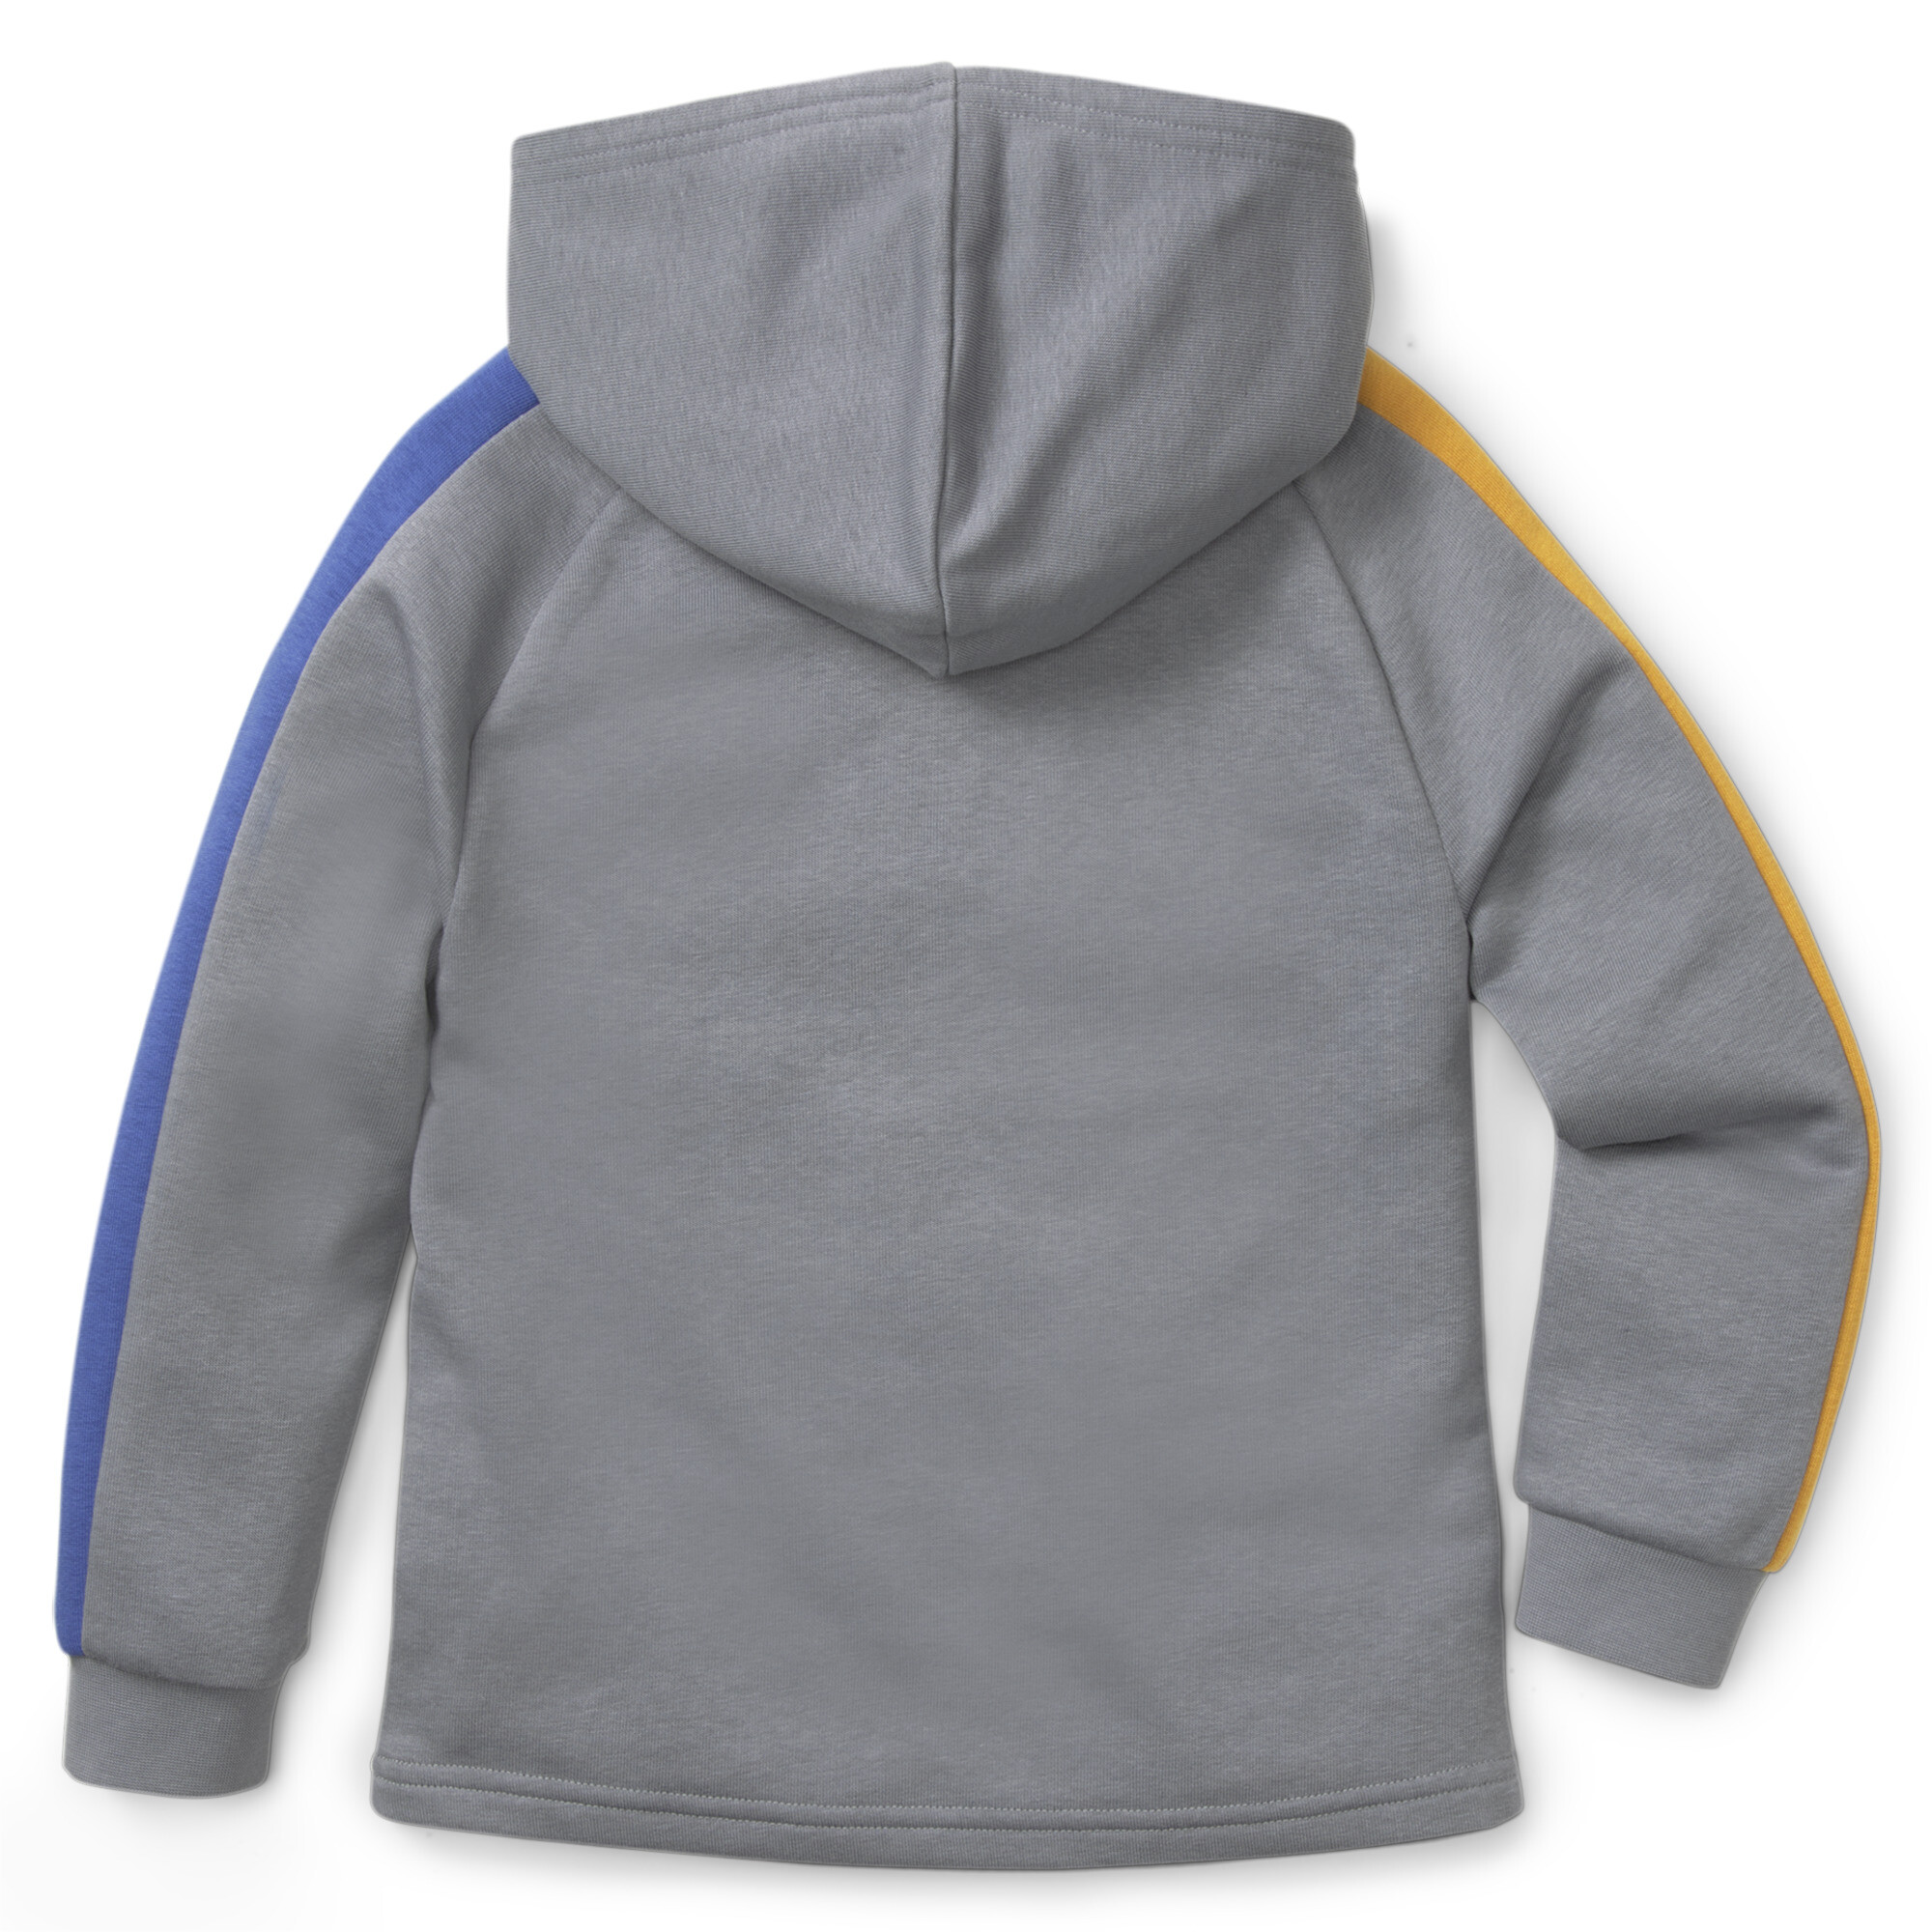 PUMA MATES T7 Hoodie Kids In Gray, Size 4-5 Youth